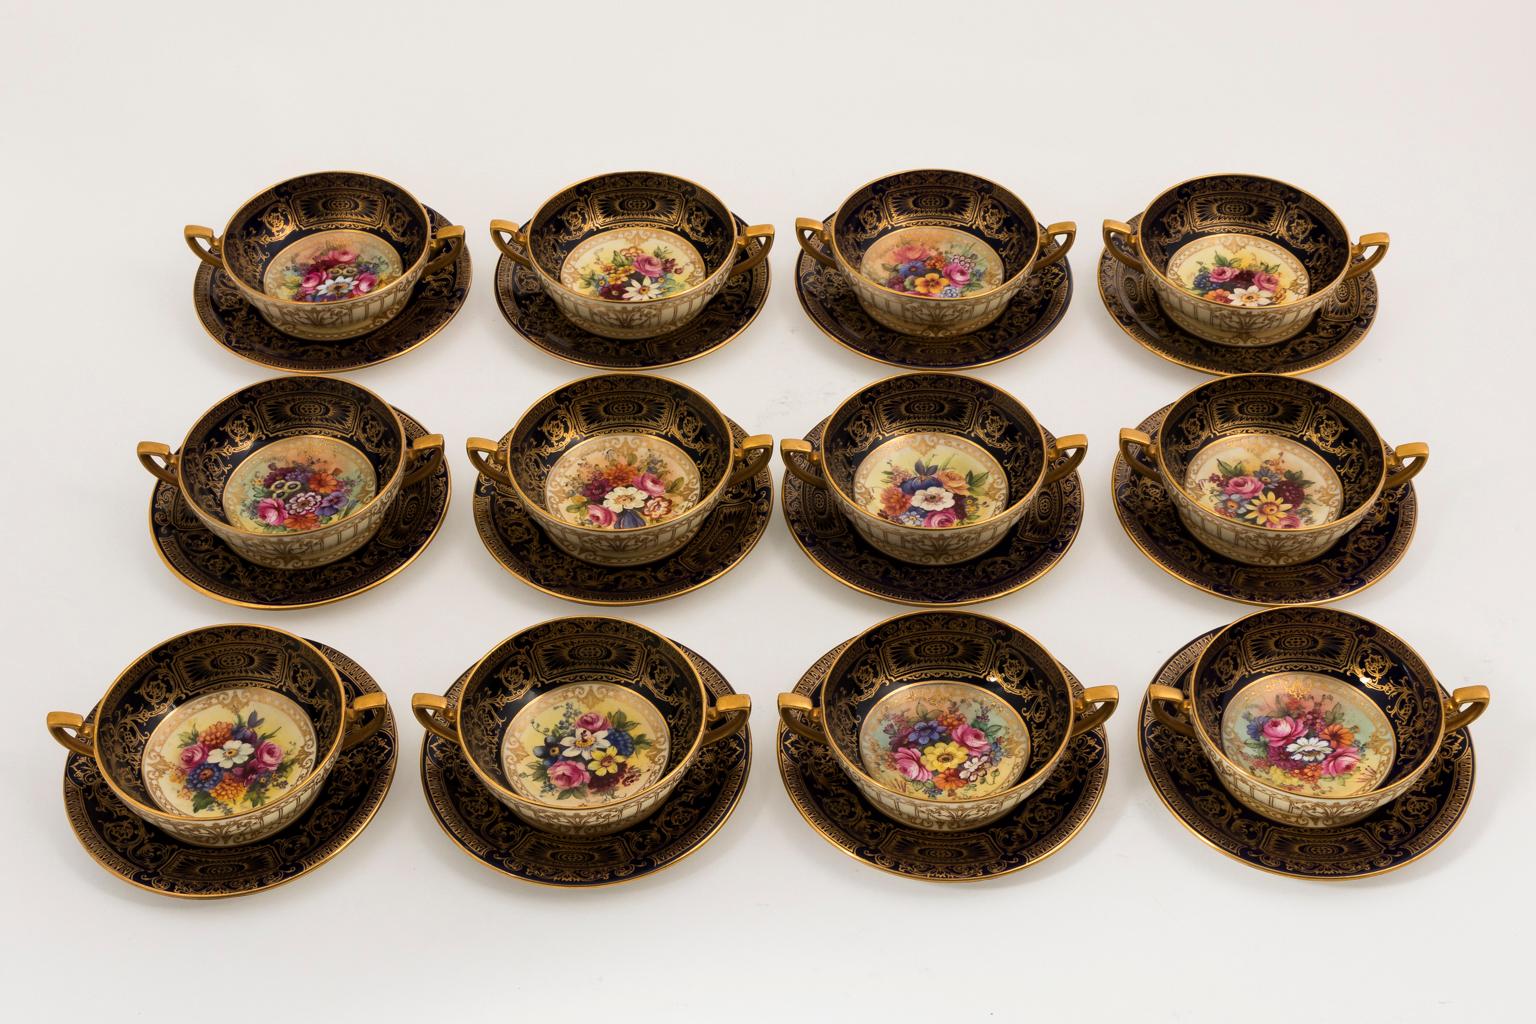 Set of twelve Bullion cups with under plates by Royal Worcester, circa early 20th century. Each cup and under plate is hand-painted with floral motifs, gilded detail, and cobalt blue borders. Artist signed. The cups measure 6.75 inches wide by 4.75